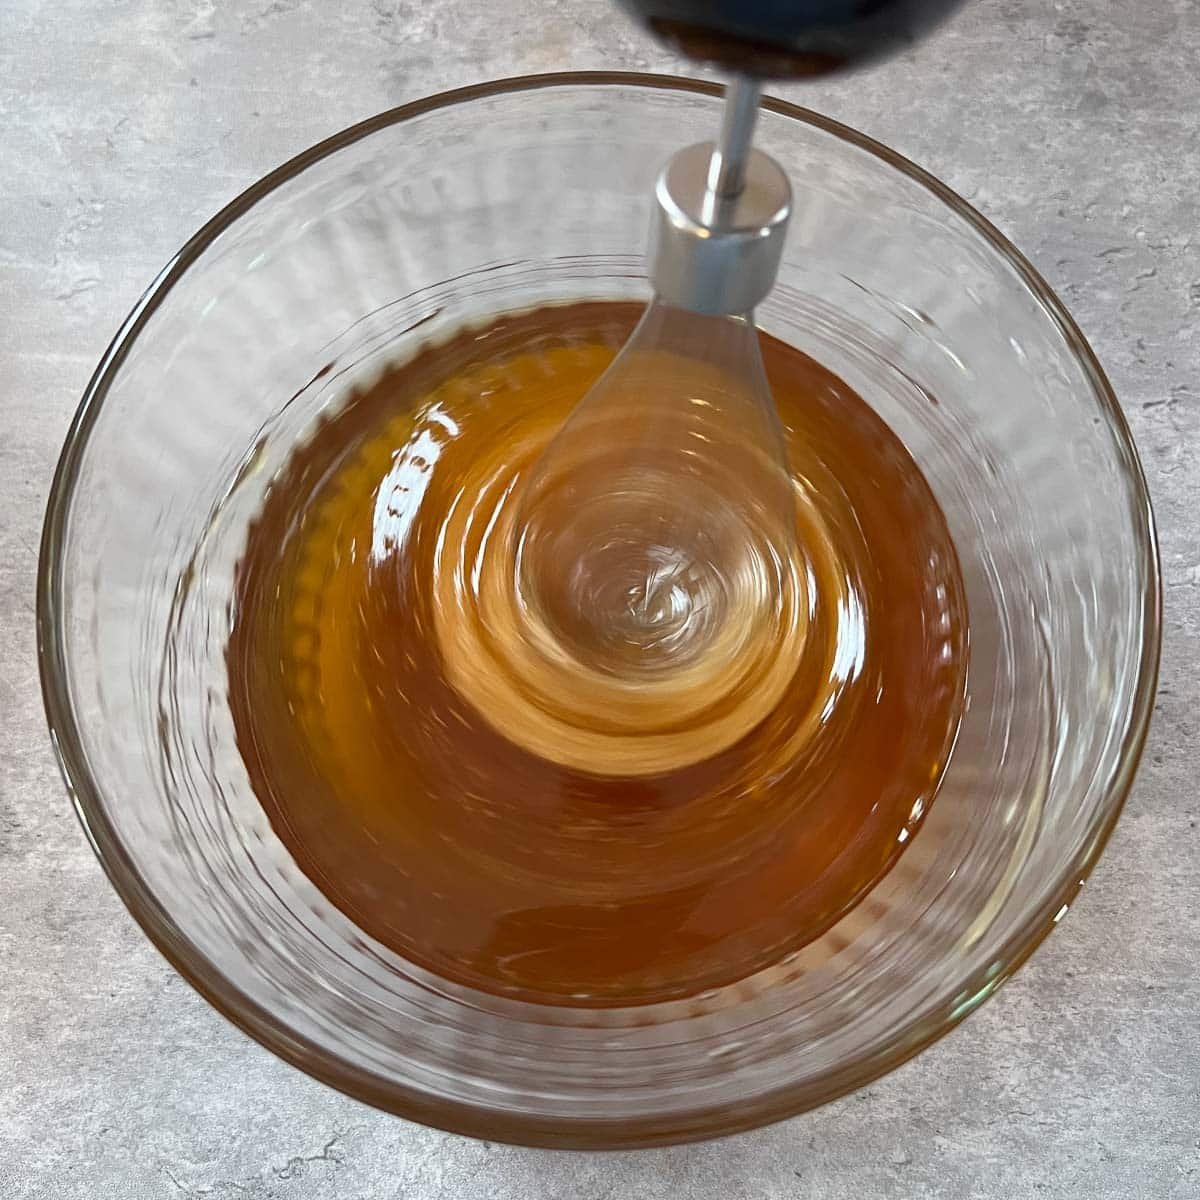 honey in clear glass bowl being whipped by hand mixer